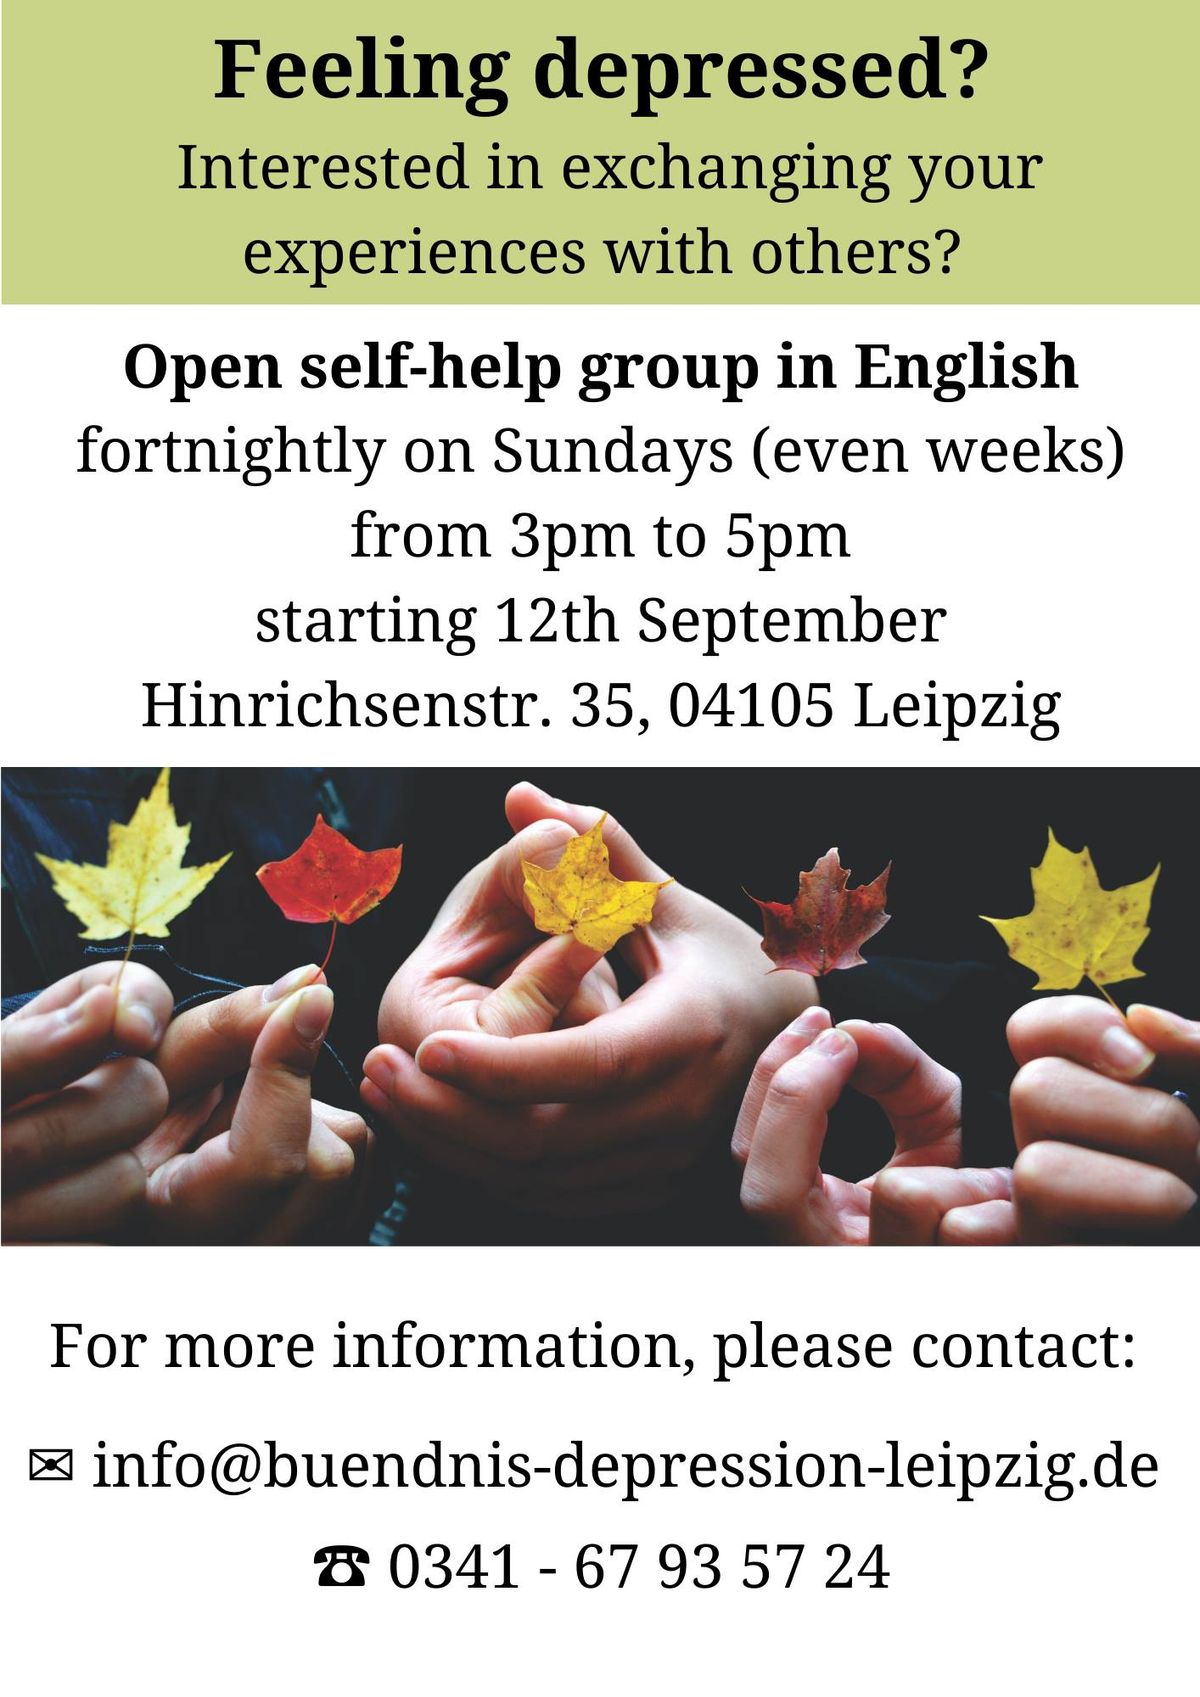 Open self-help group in English